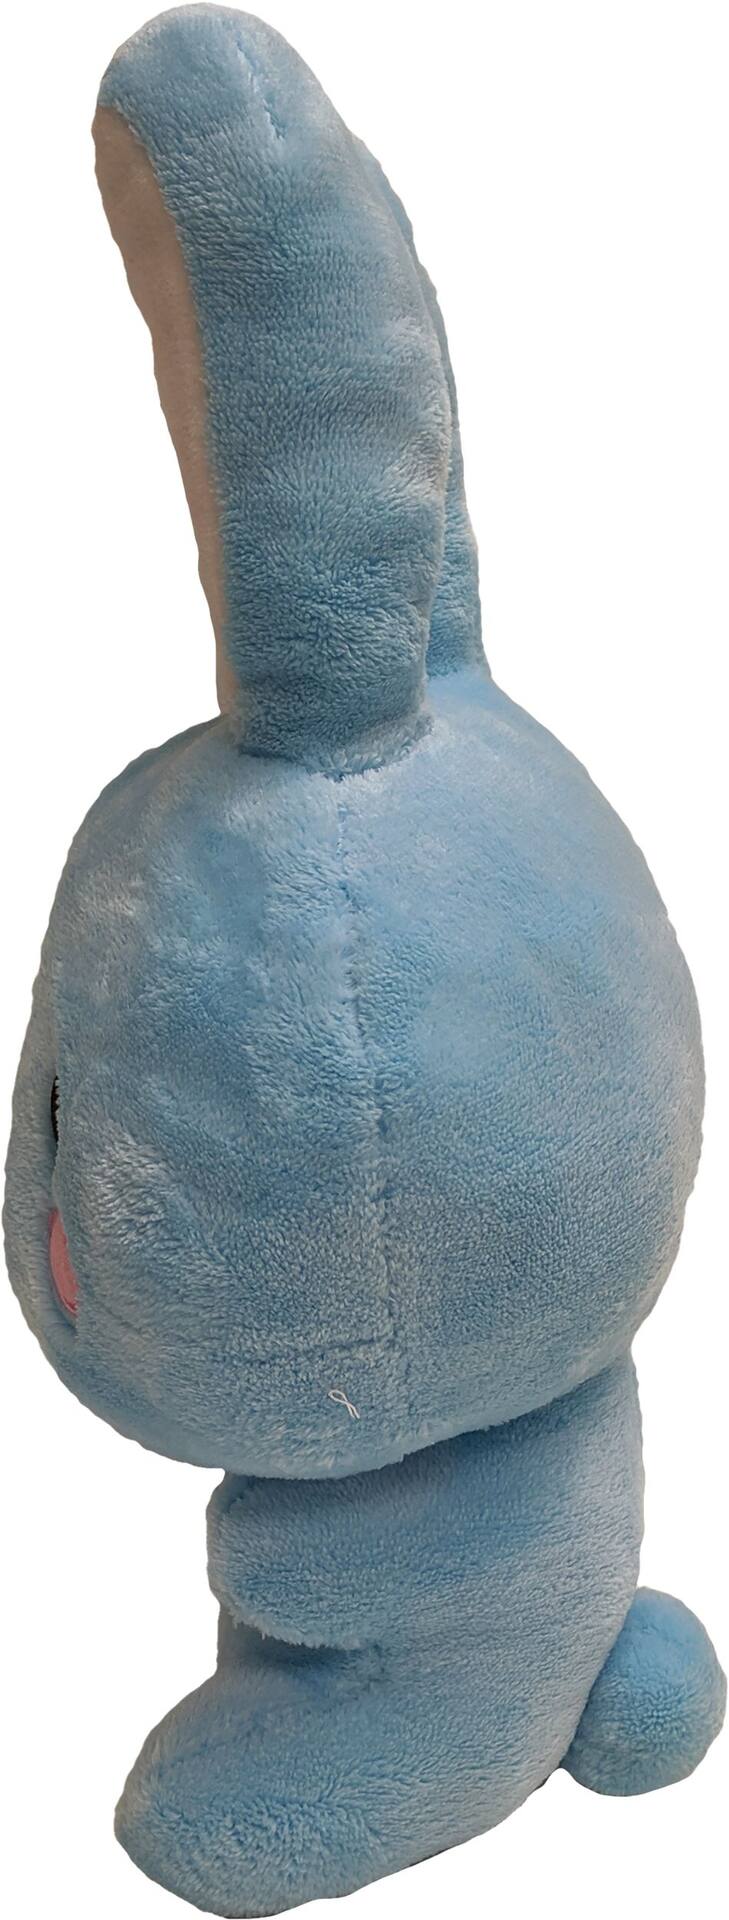 Amscan Kawaii Blue Bunny Plush, 8-in x 14-in, Ages 5+